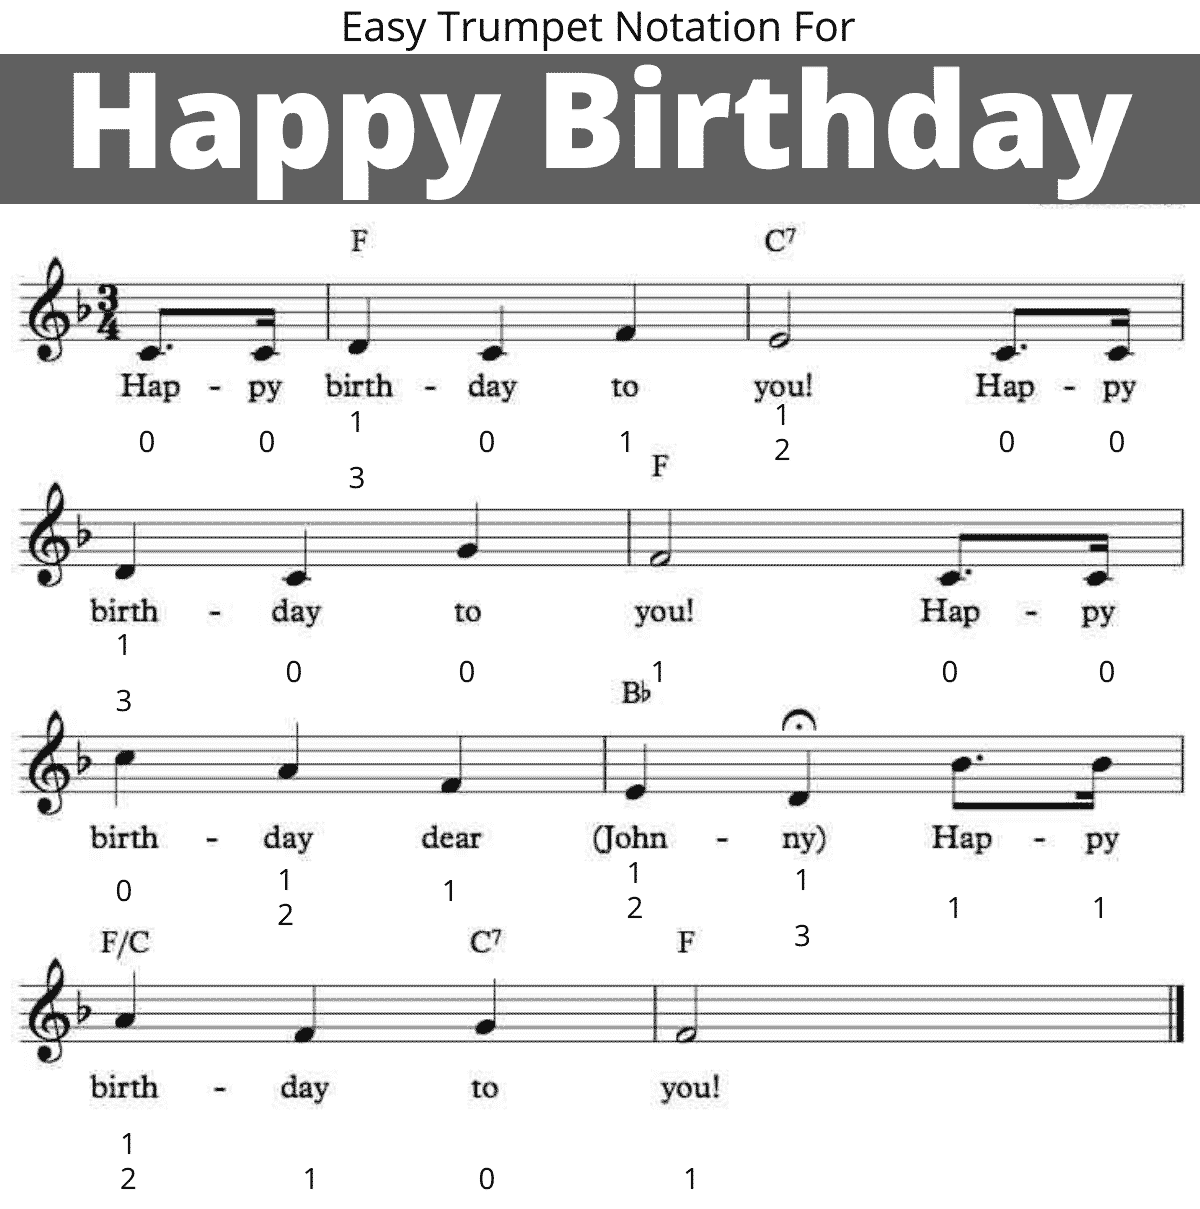 Happy Birthday song noted for trumpet beginners in F major key